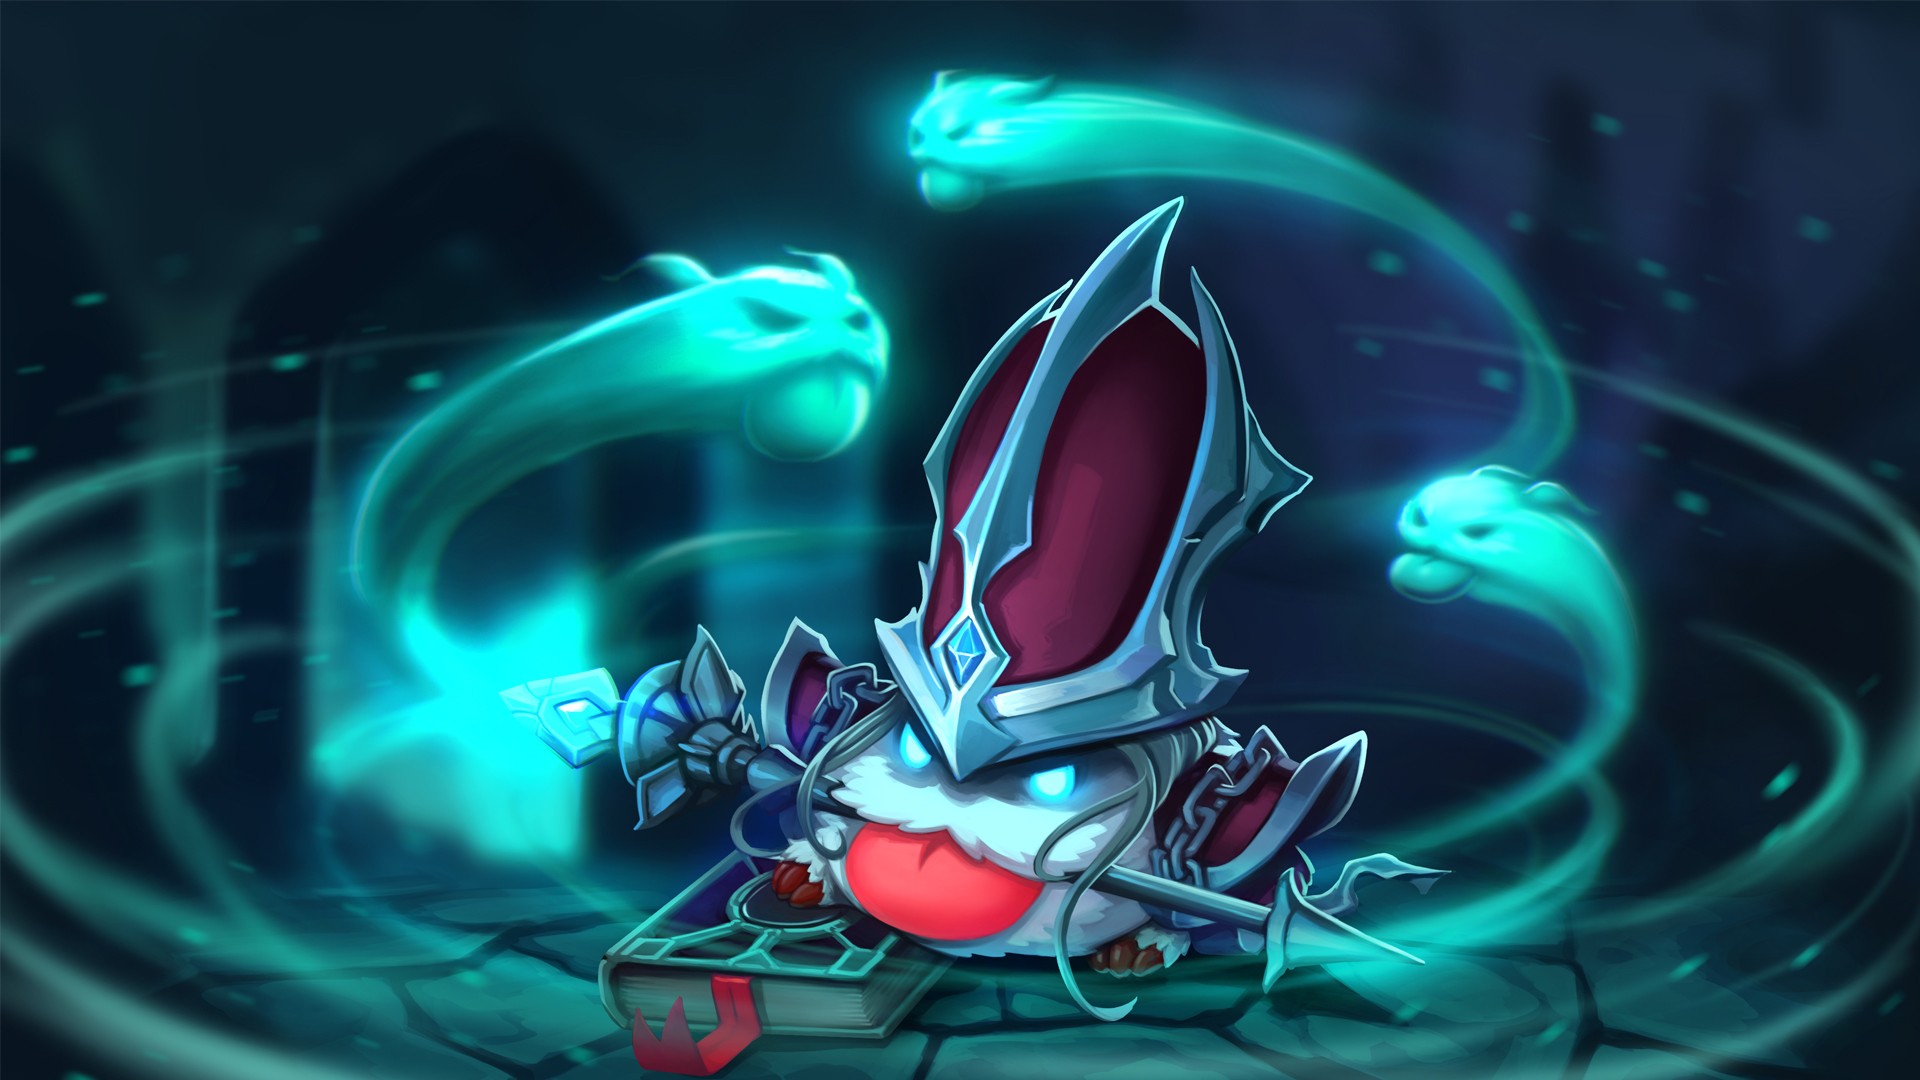 General 1920x1080 League of Legends cyan Poro (League of Legends) Karthus (League of Legends) video game art PC gaming video game characters digital art